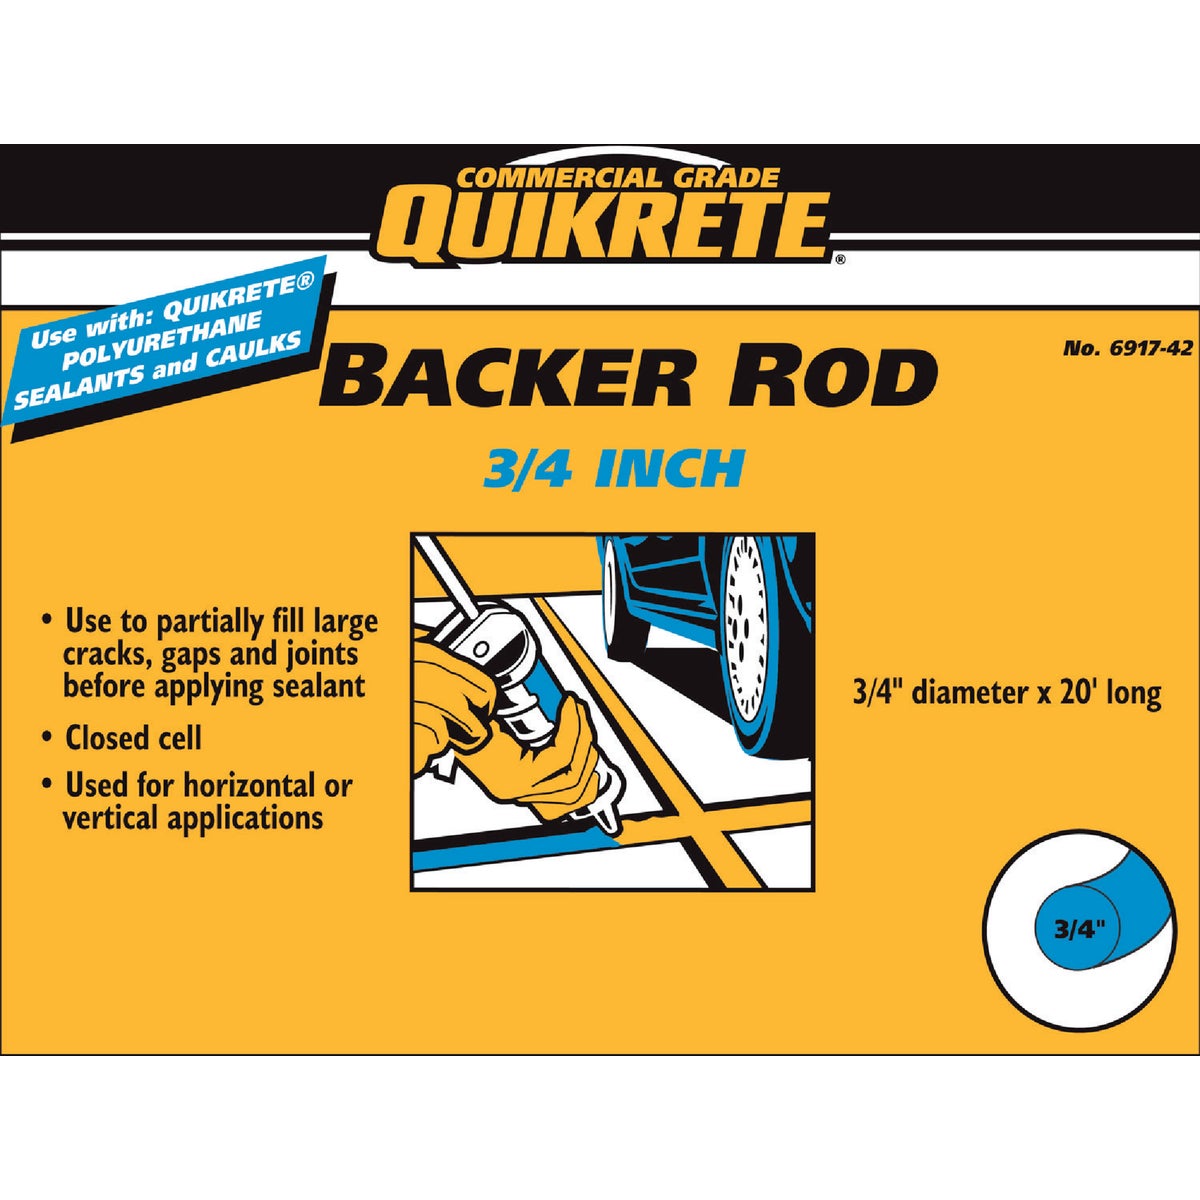 Item 260043, Backer rod is a nonabsorbent, compressible rod foam rope used to partially 